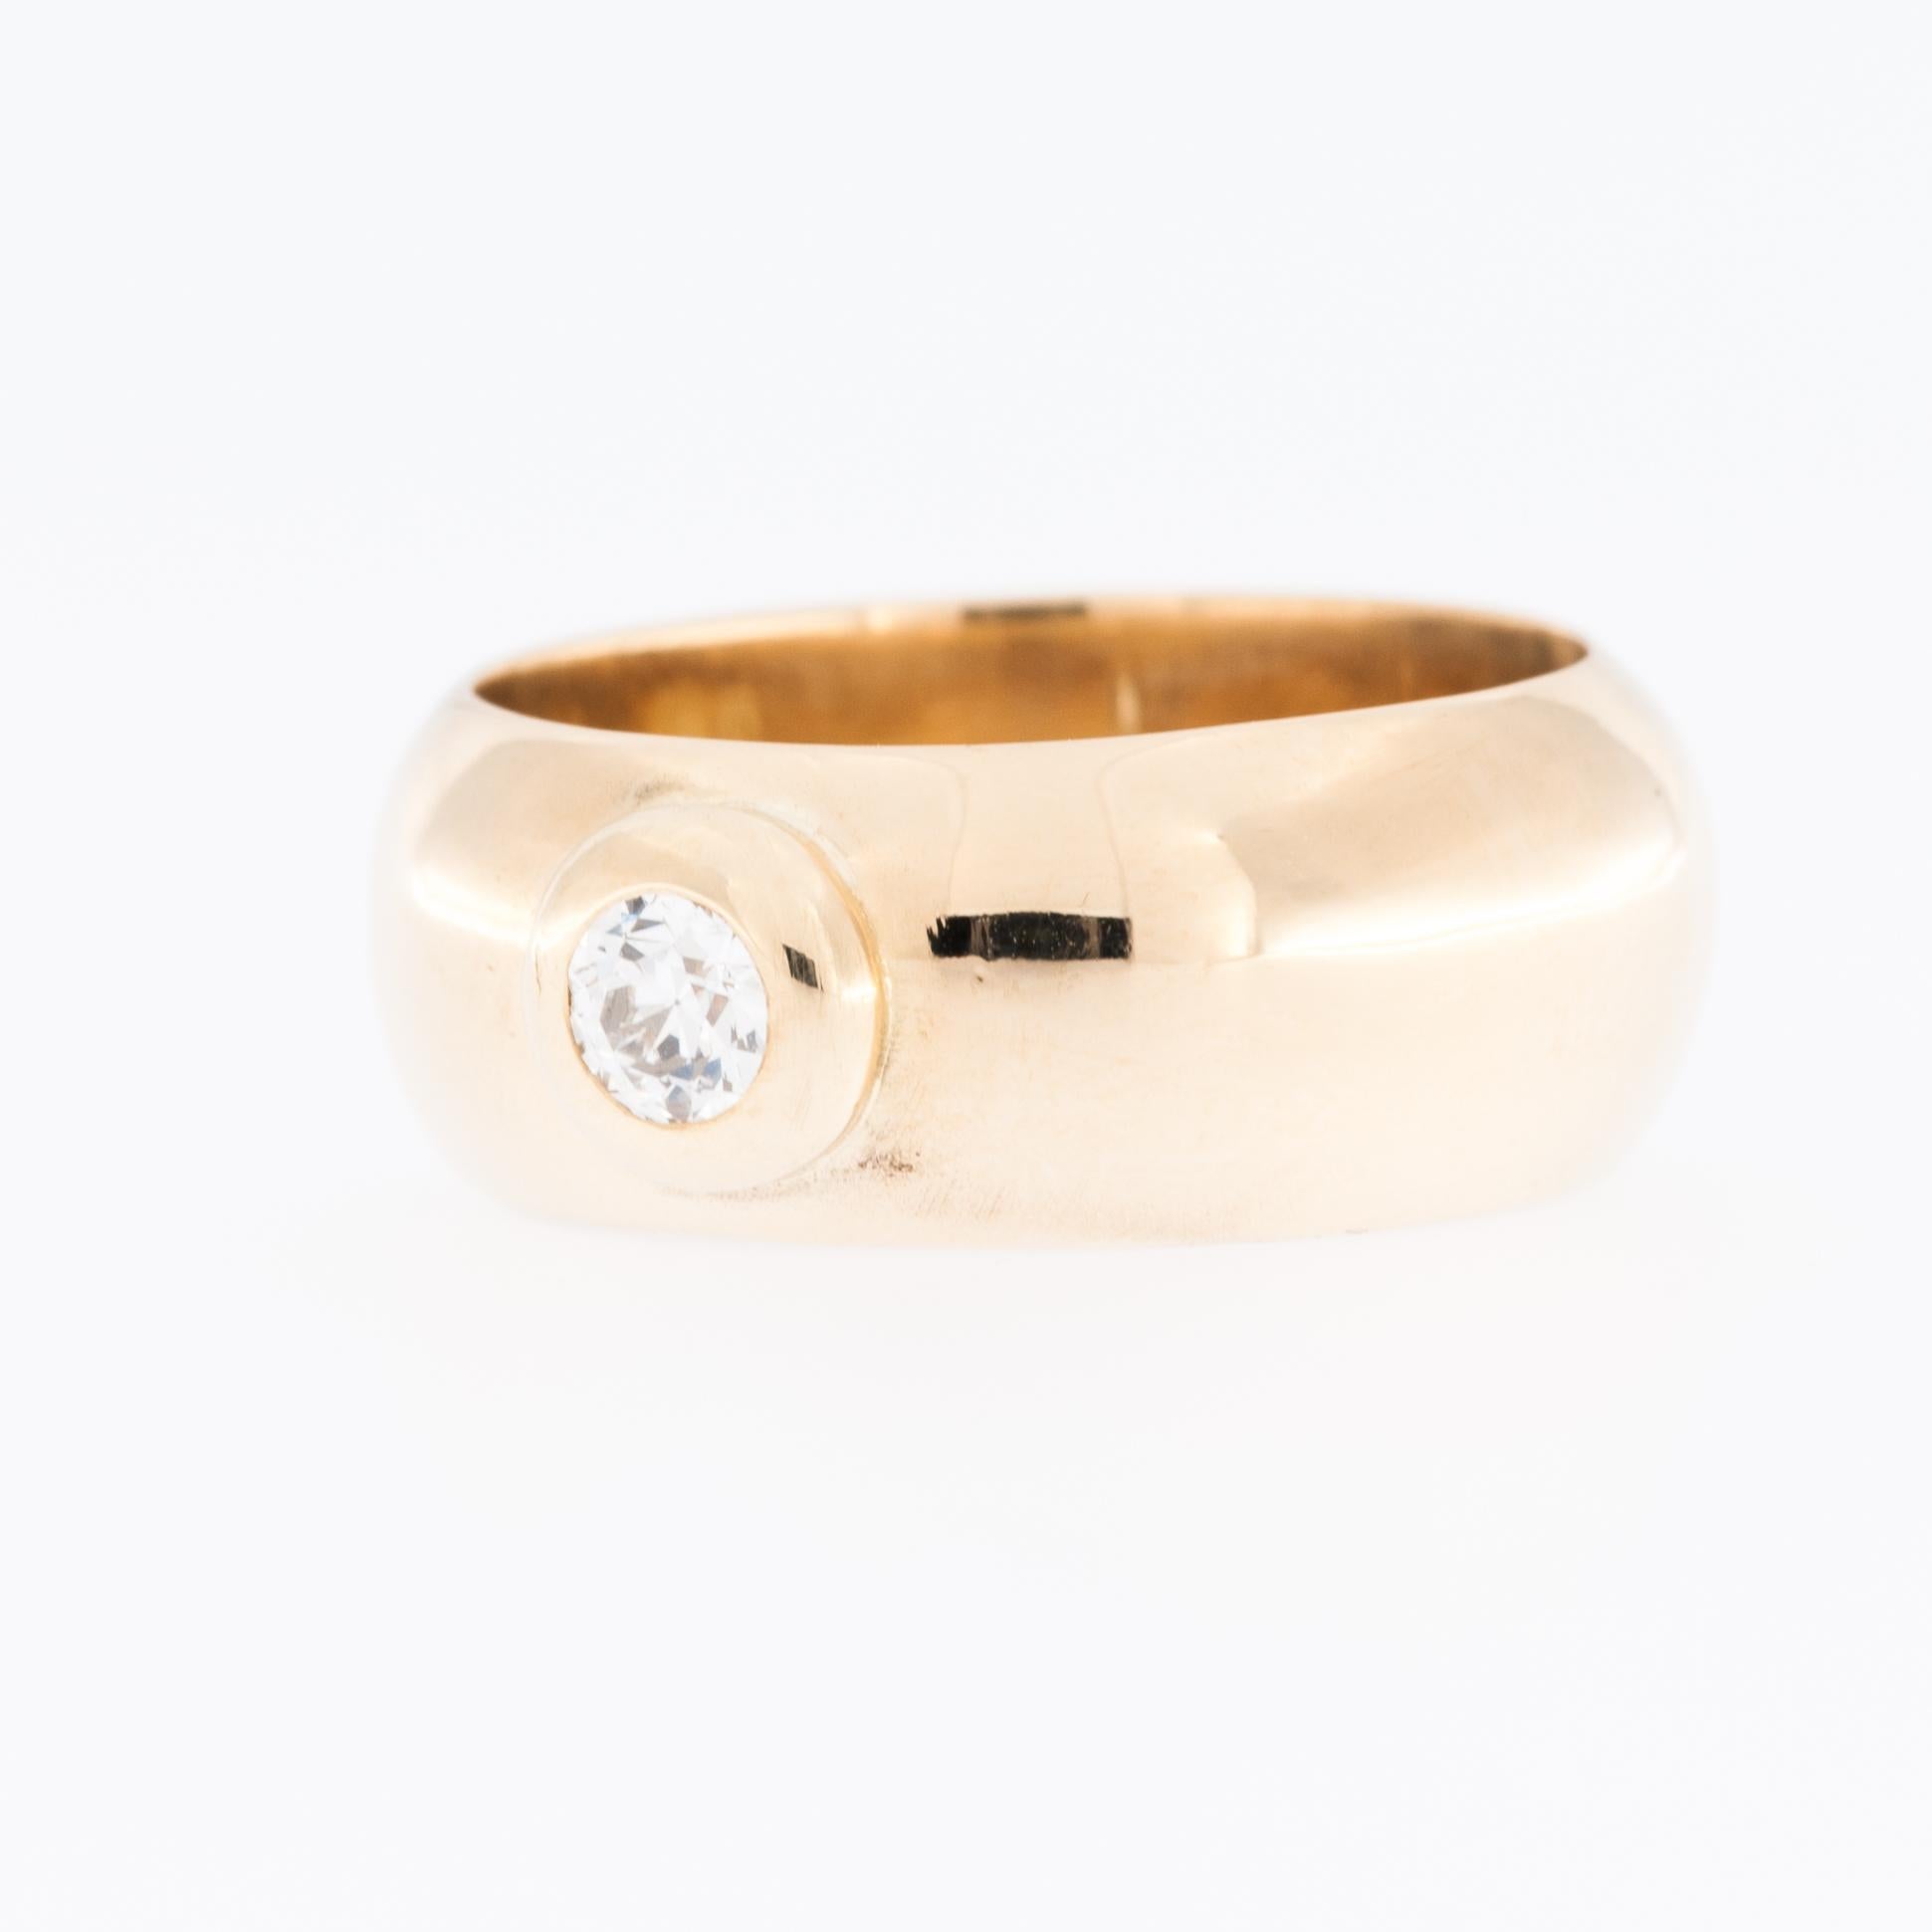 Italian 18 karat Yellow Gold Band Ring with Diamond In Good Condition For Sale In Esch-Sur-Alzette, LU